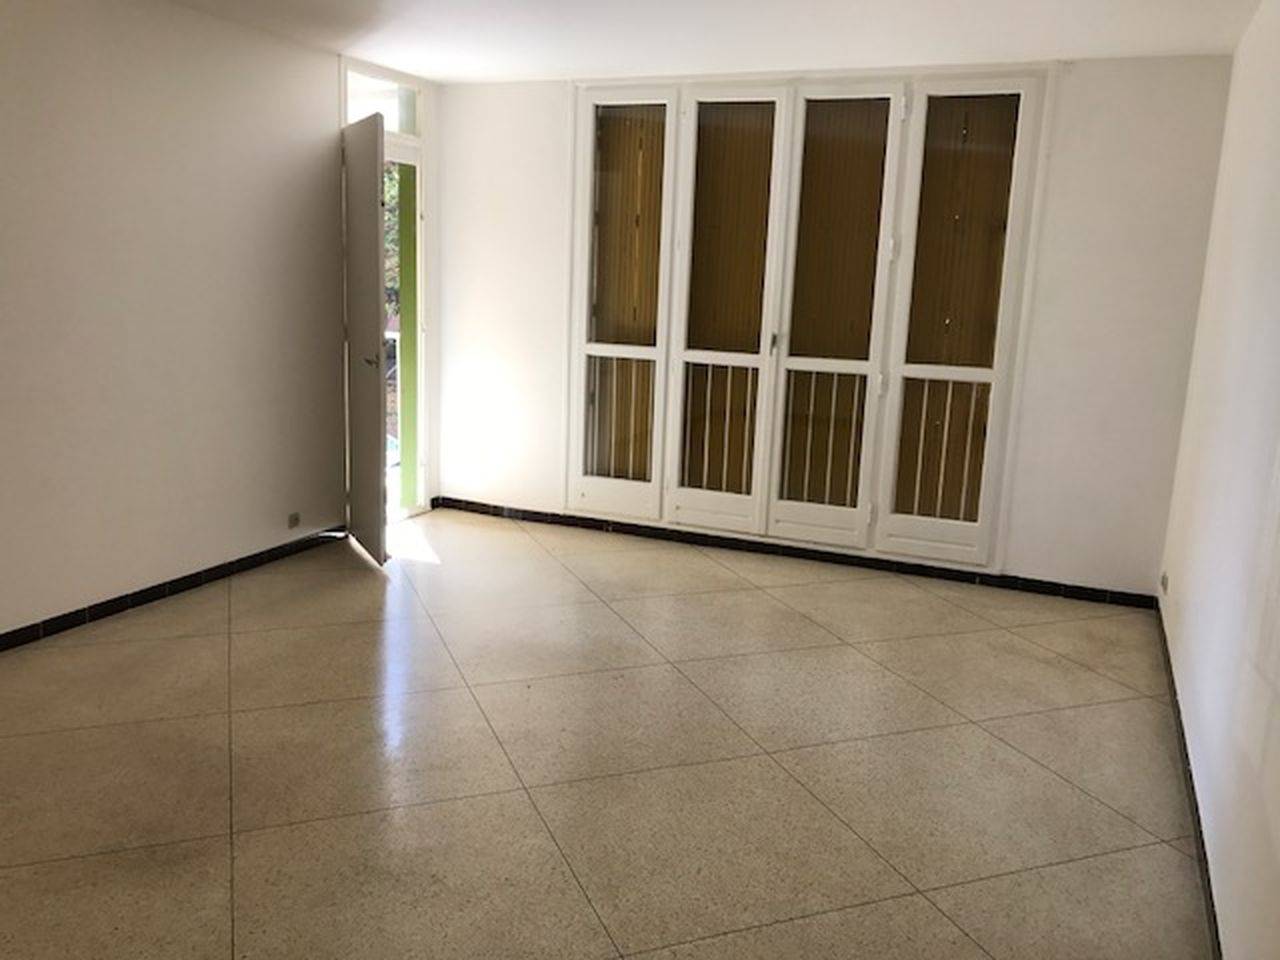 Location Appartements T3 Marignane 13700 Résidence Concorde 2 chambres, balcon, sdb, dressing